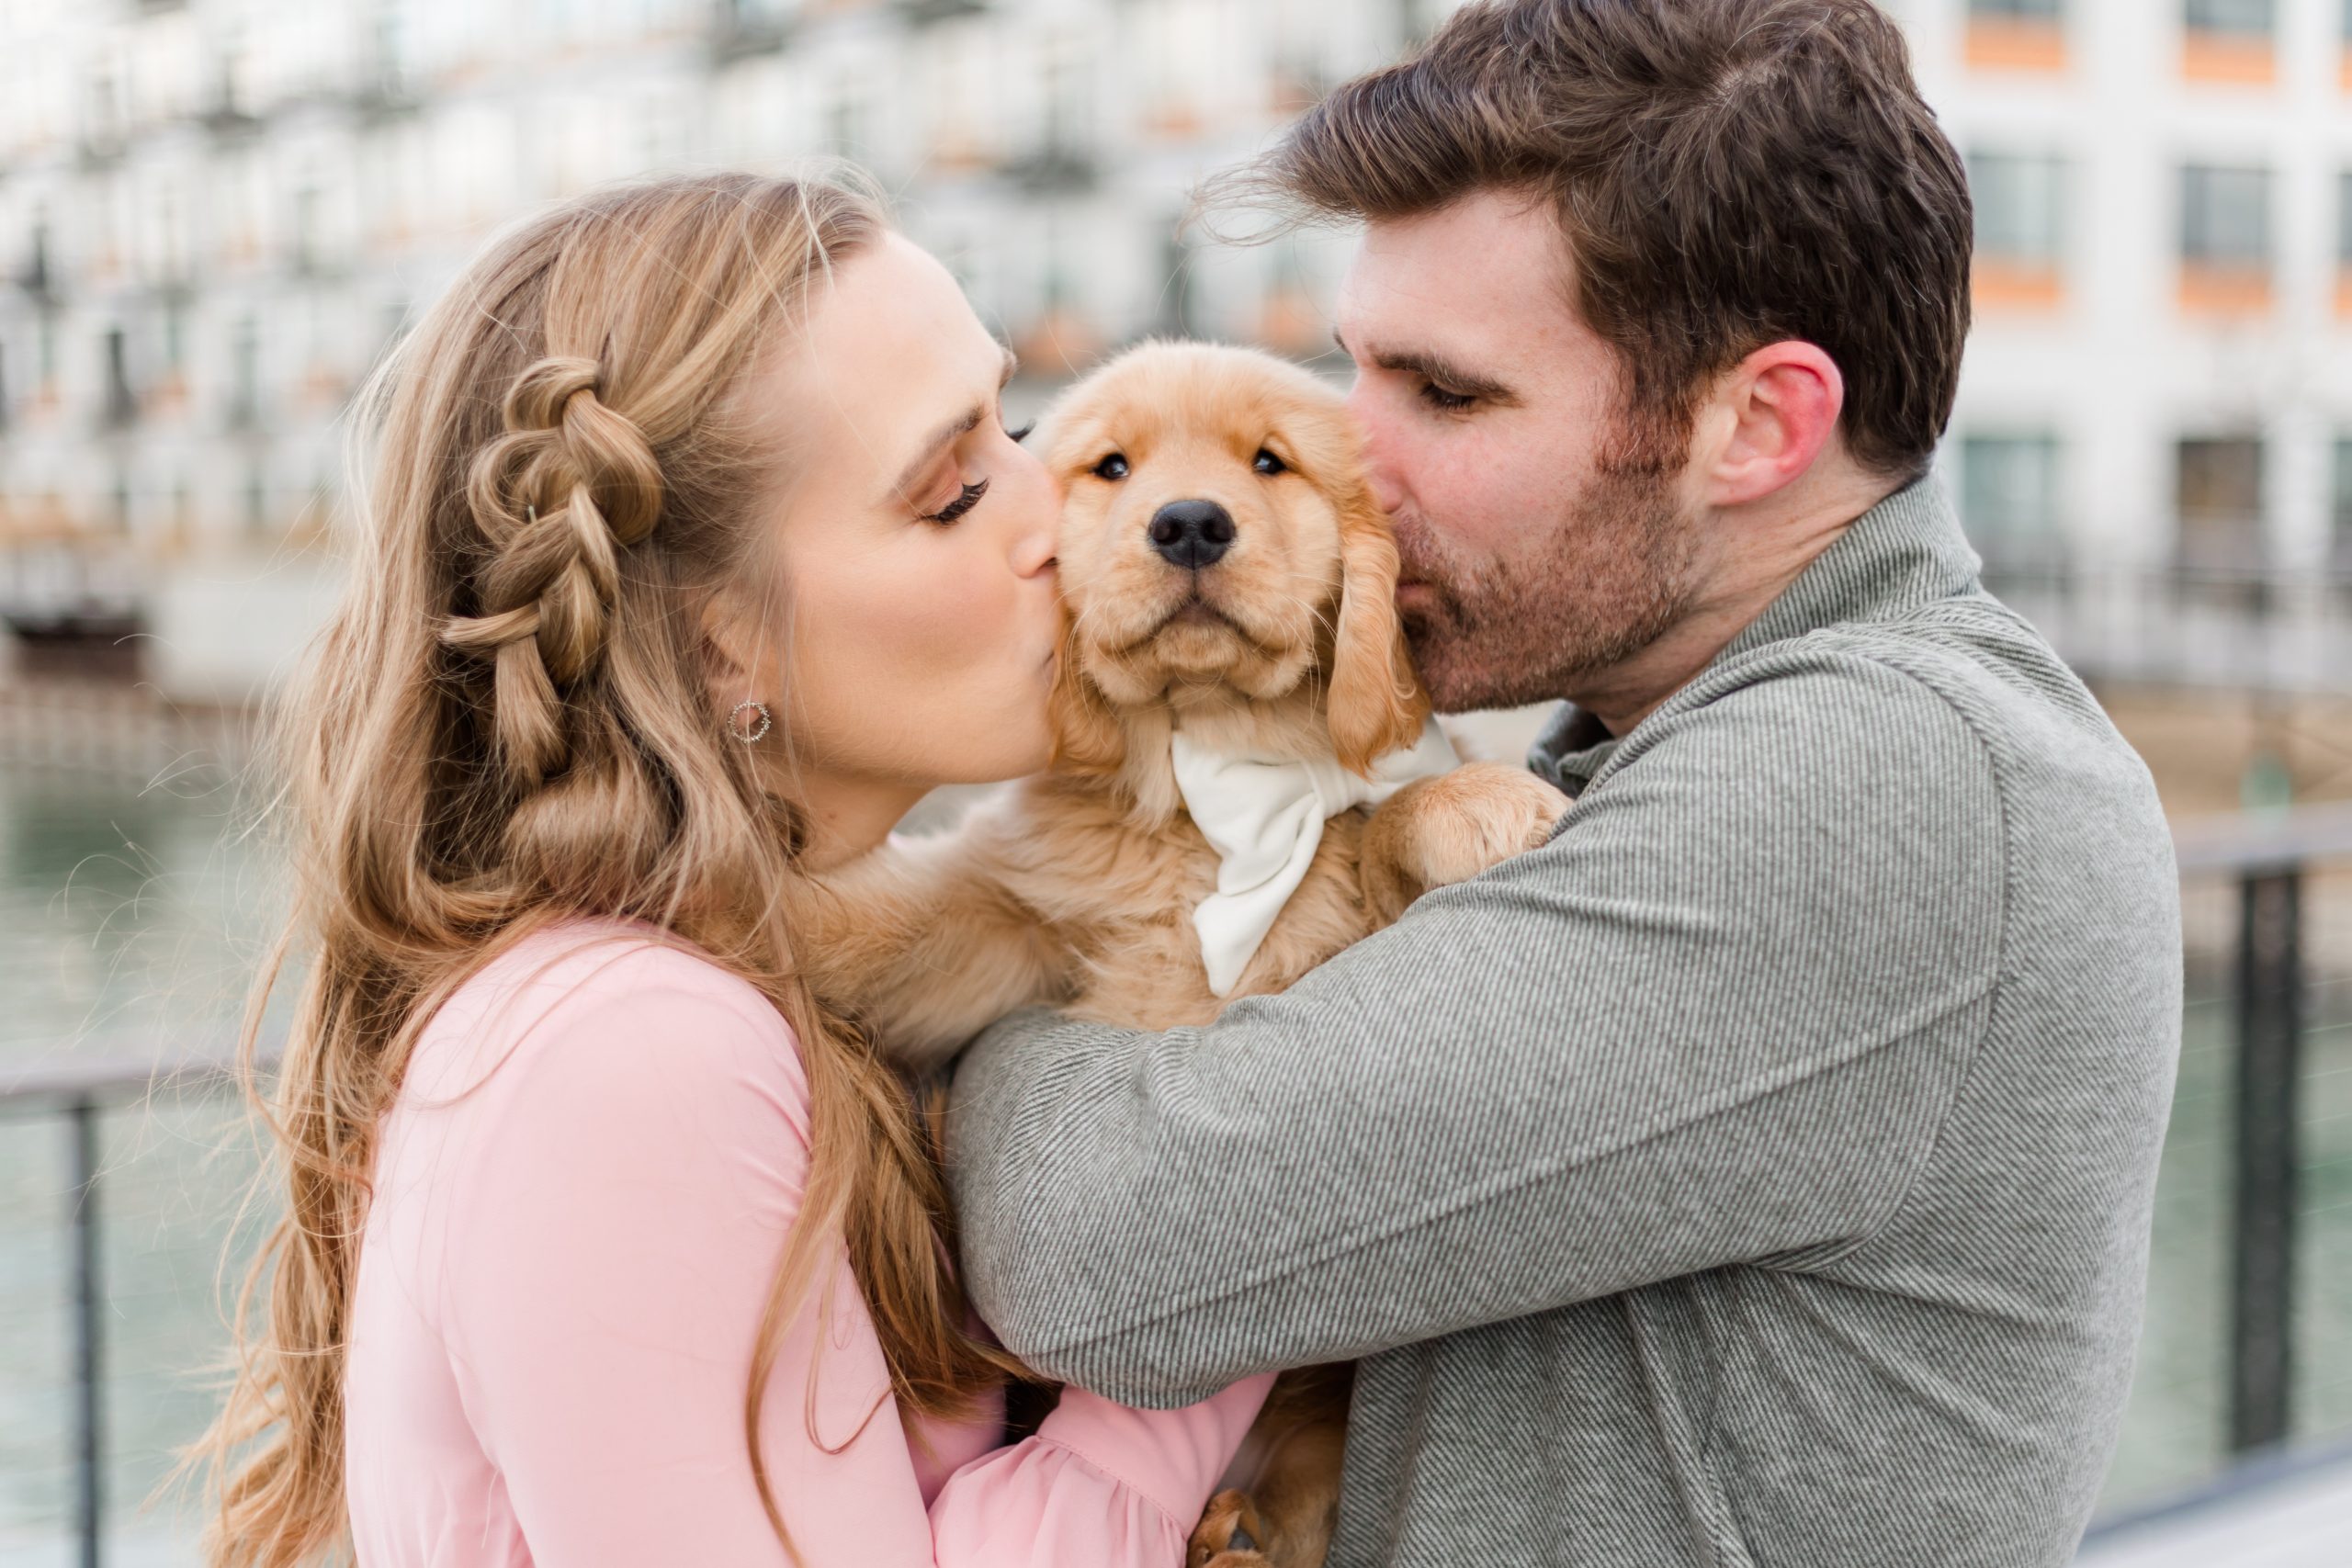 Woman in pink dress and man in green sweater kissing a golden retriever puppy